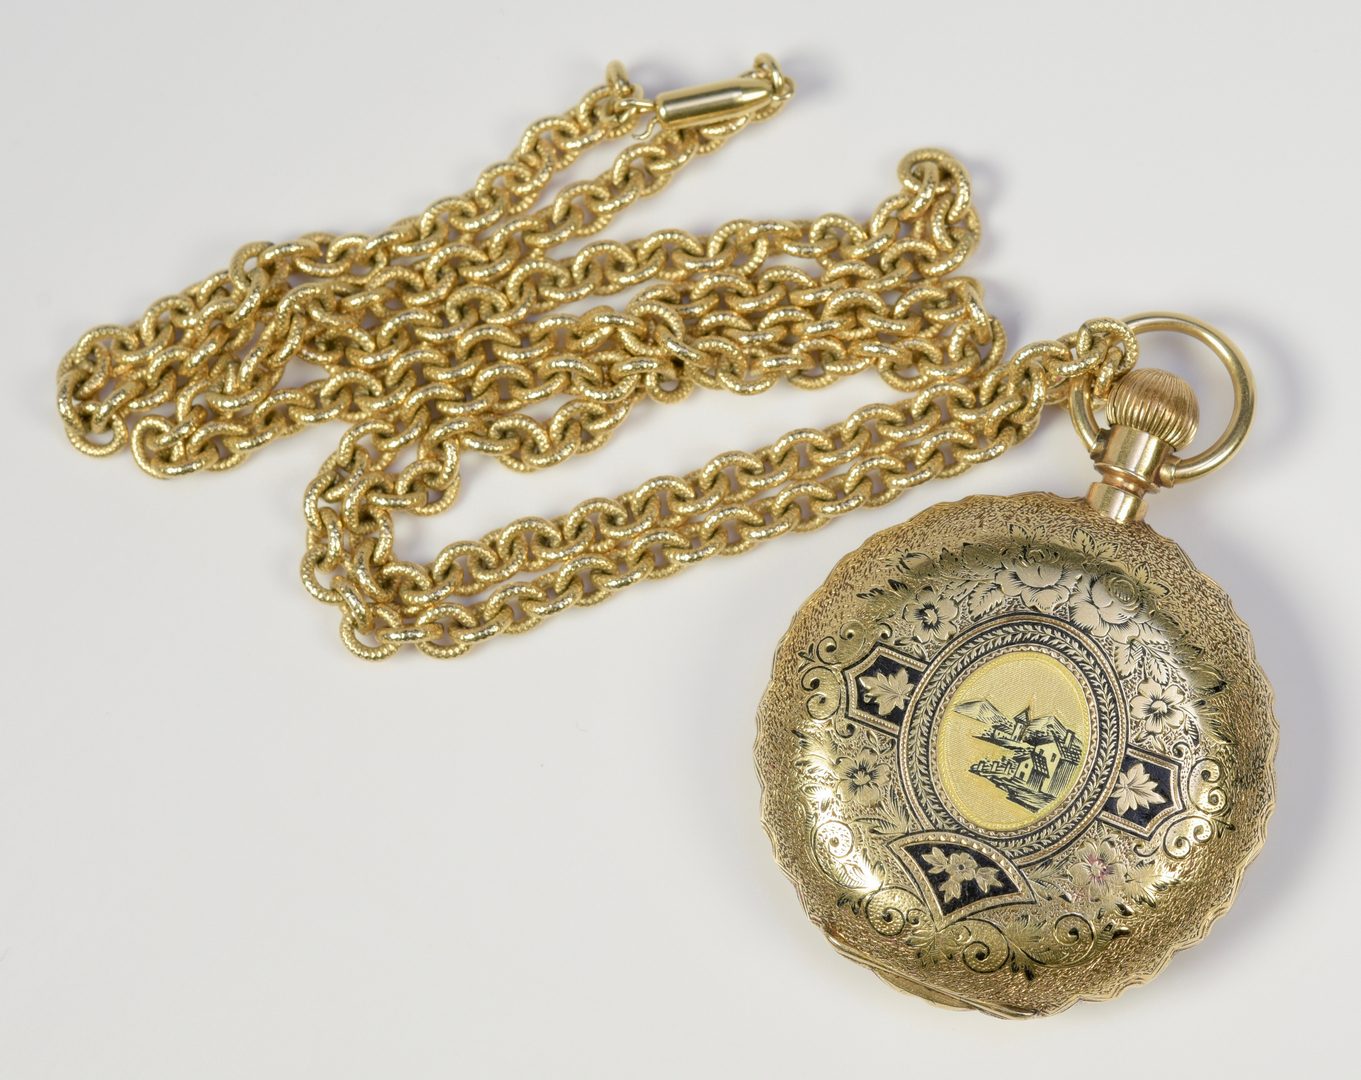 Lot 946: 14K Elgin Hunting Case Watch, dated 1883